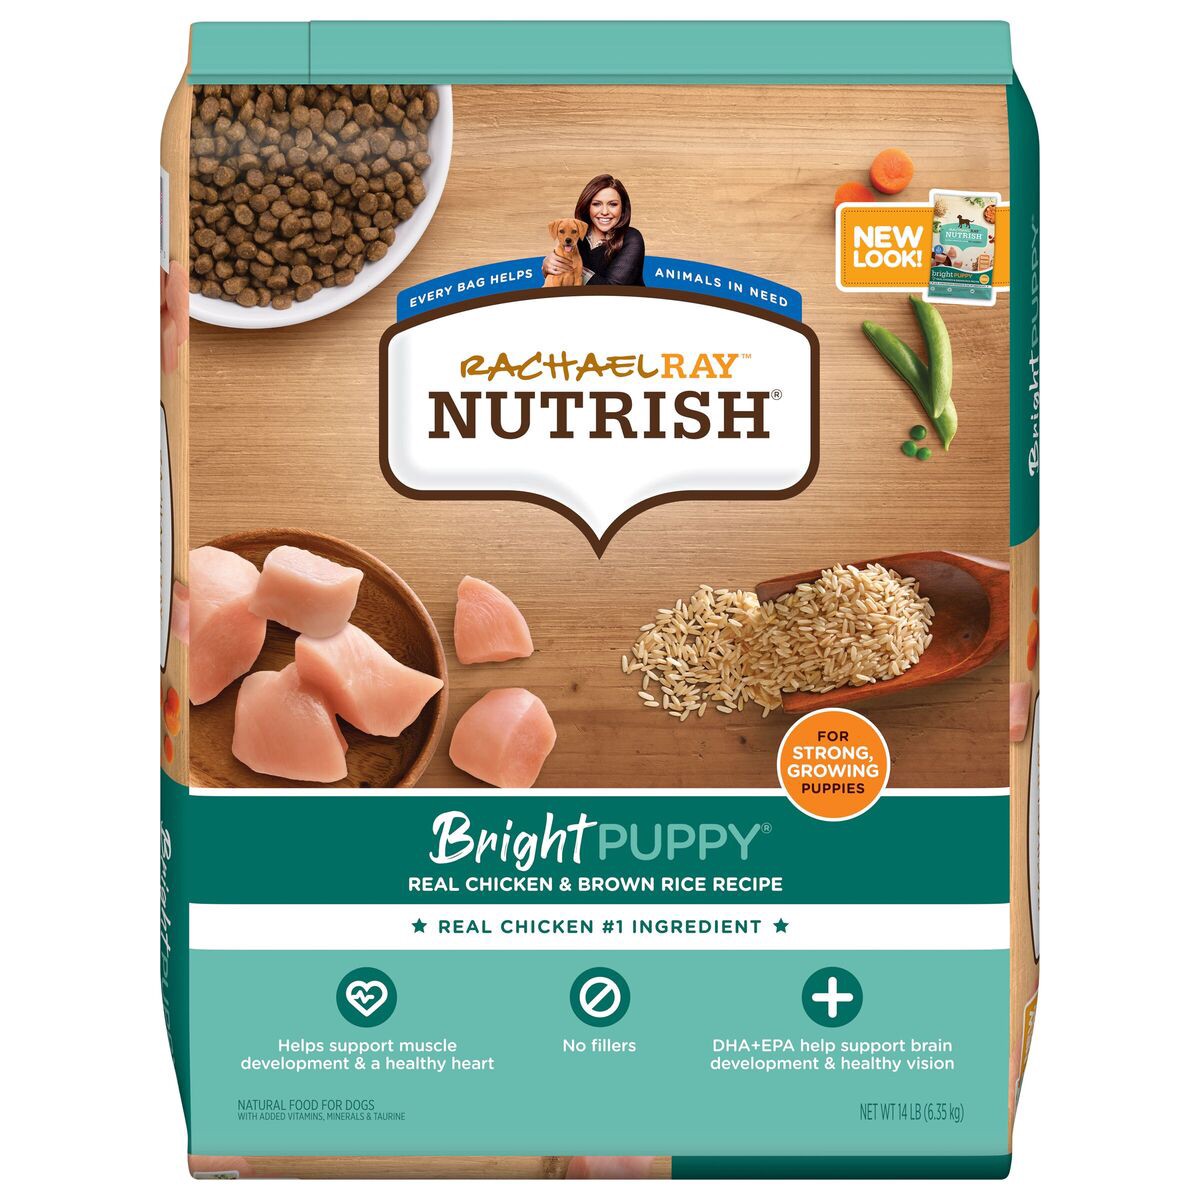 slide 1 of 25, Rachael Ray Nutrish Bright Puppy Real Chicken & Brown Rice Recipe Dry Dog Food, 14 lb. Bag, 14 lb